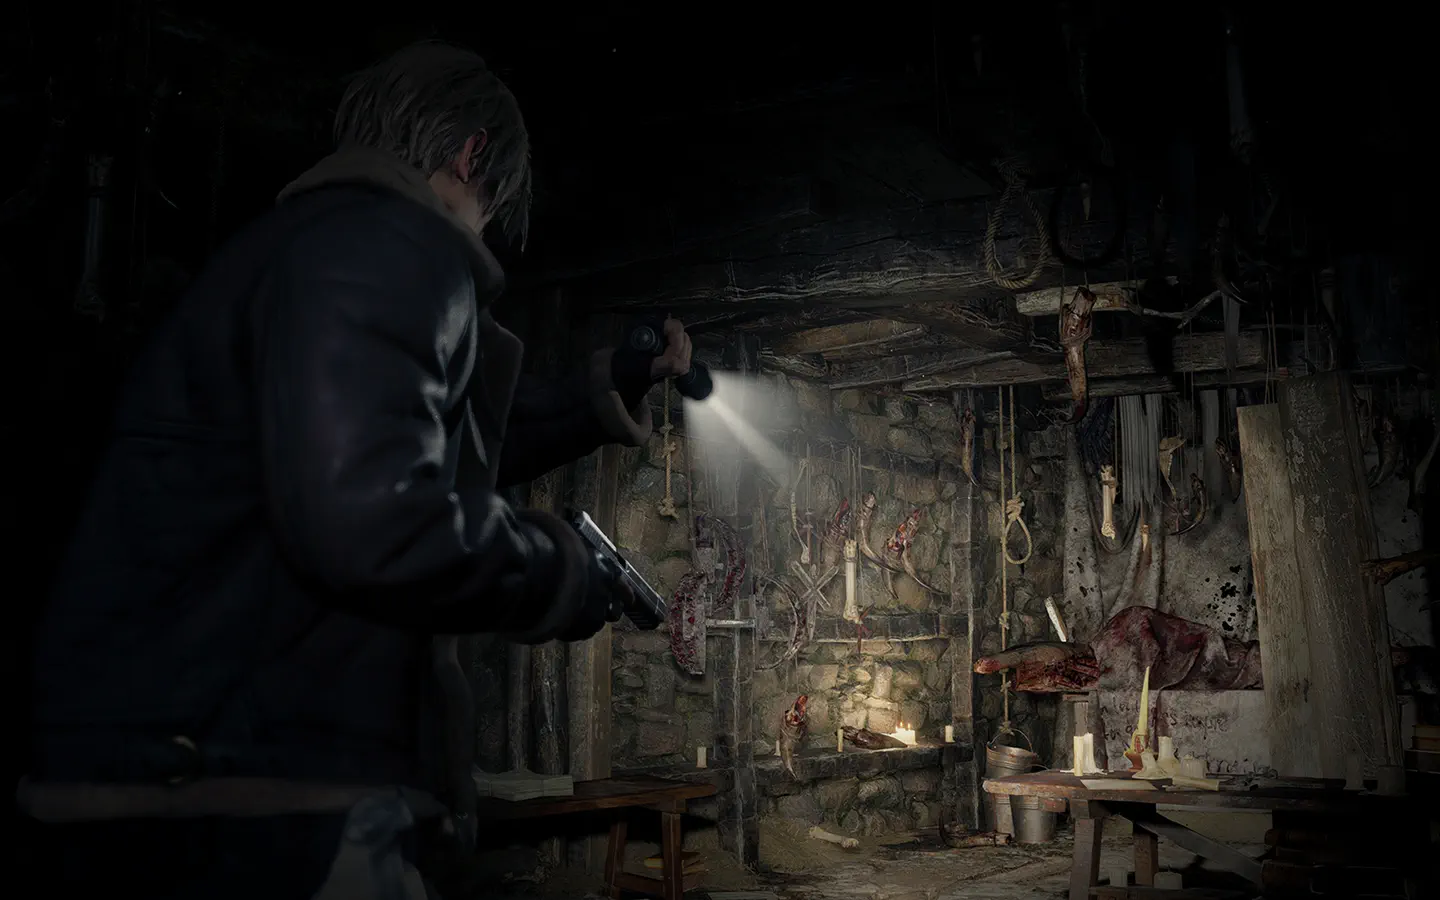 Resident Evil 4 Remake App Store Listing Goes Live, Priced at Premium Cost  of Rs. 3,599